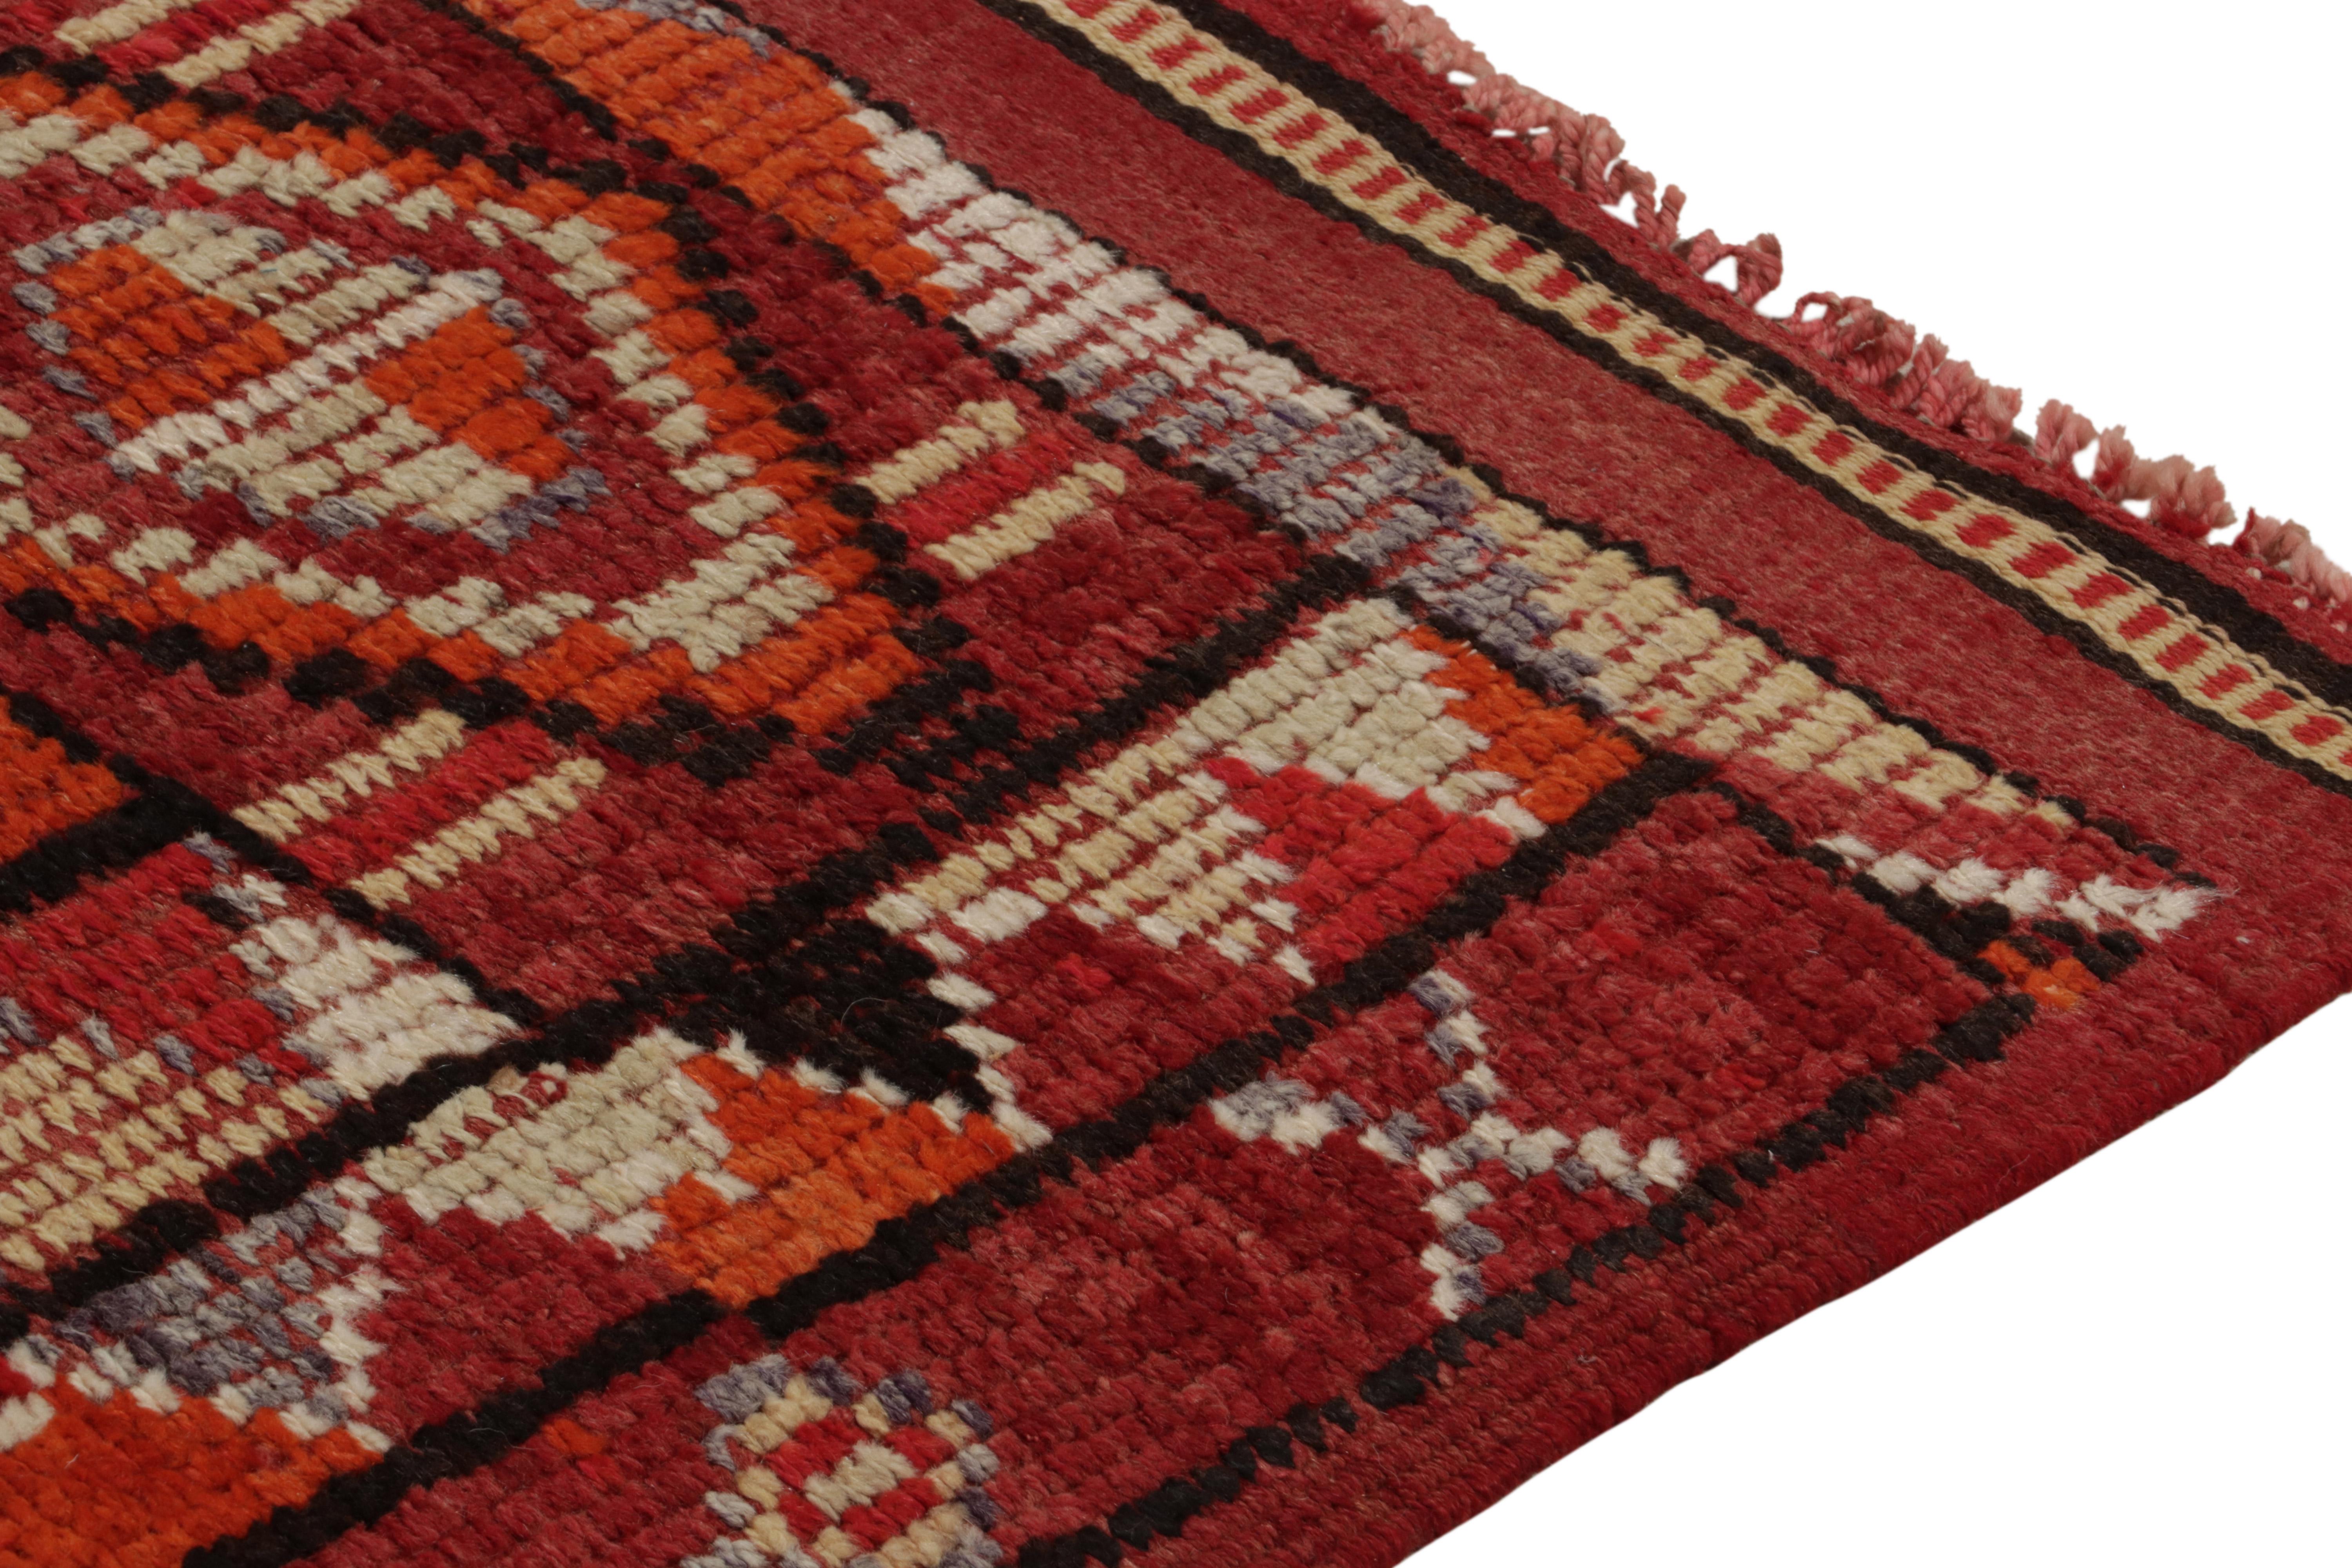 Vintage Tribal Kilim Runner Red with Vibrant Geometric Patterns by Rug & Kilim In Good Condition For Sale In Long Island City, NY